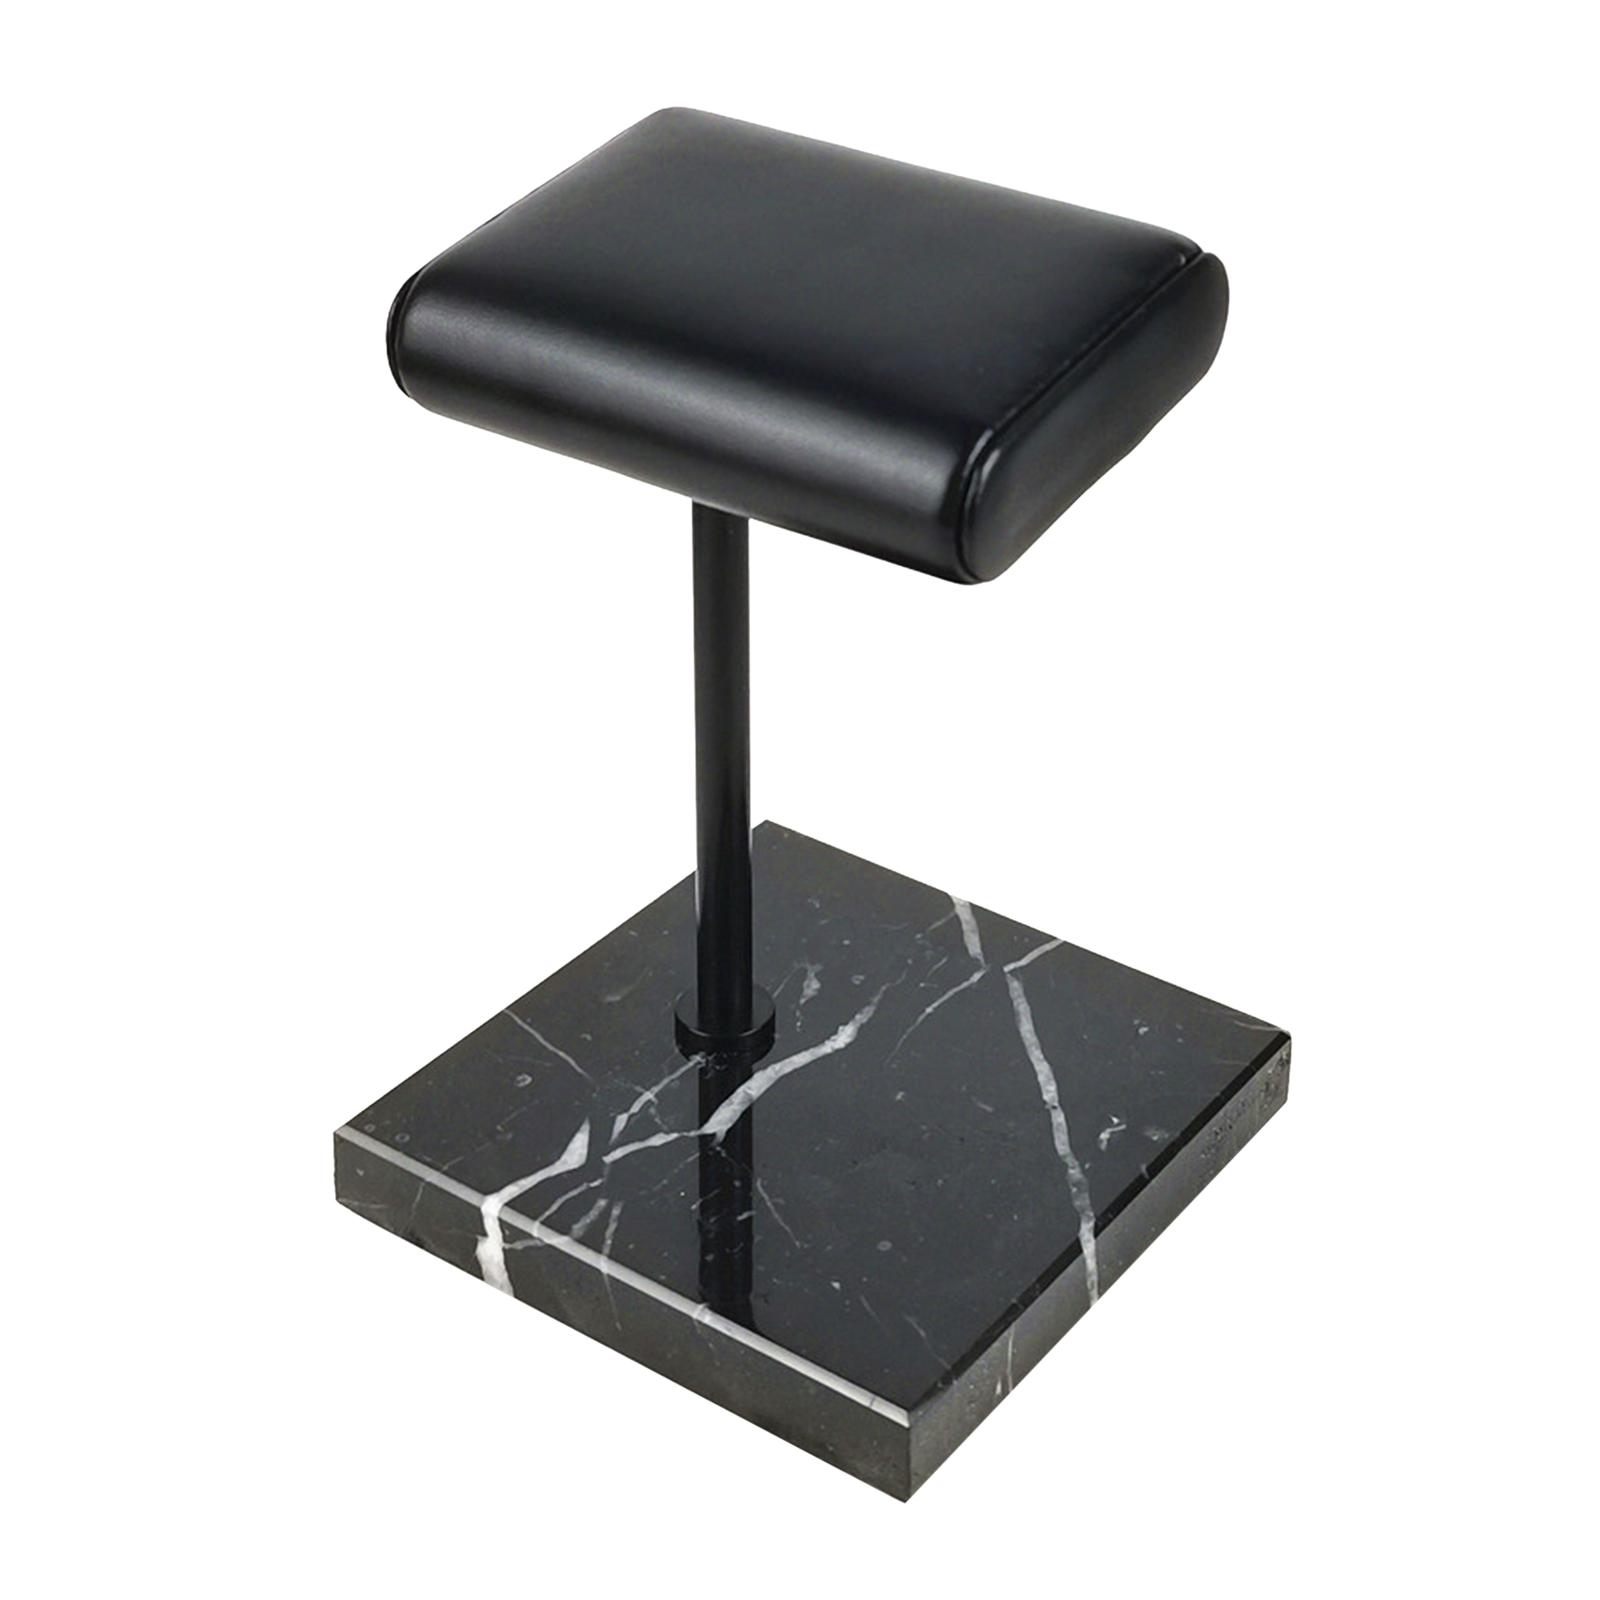 Watch Stand, Jewelry Holder Stand, PU Leather & Marble Watch Display Stand for Watches, Jewelry, Bracelets and Bangles (Metal, Marble, PU Leather)